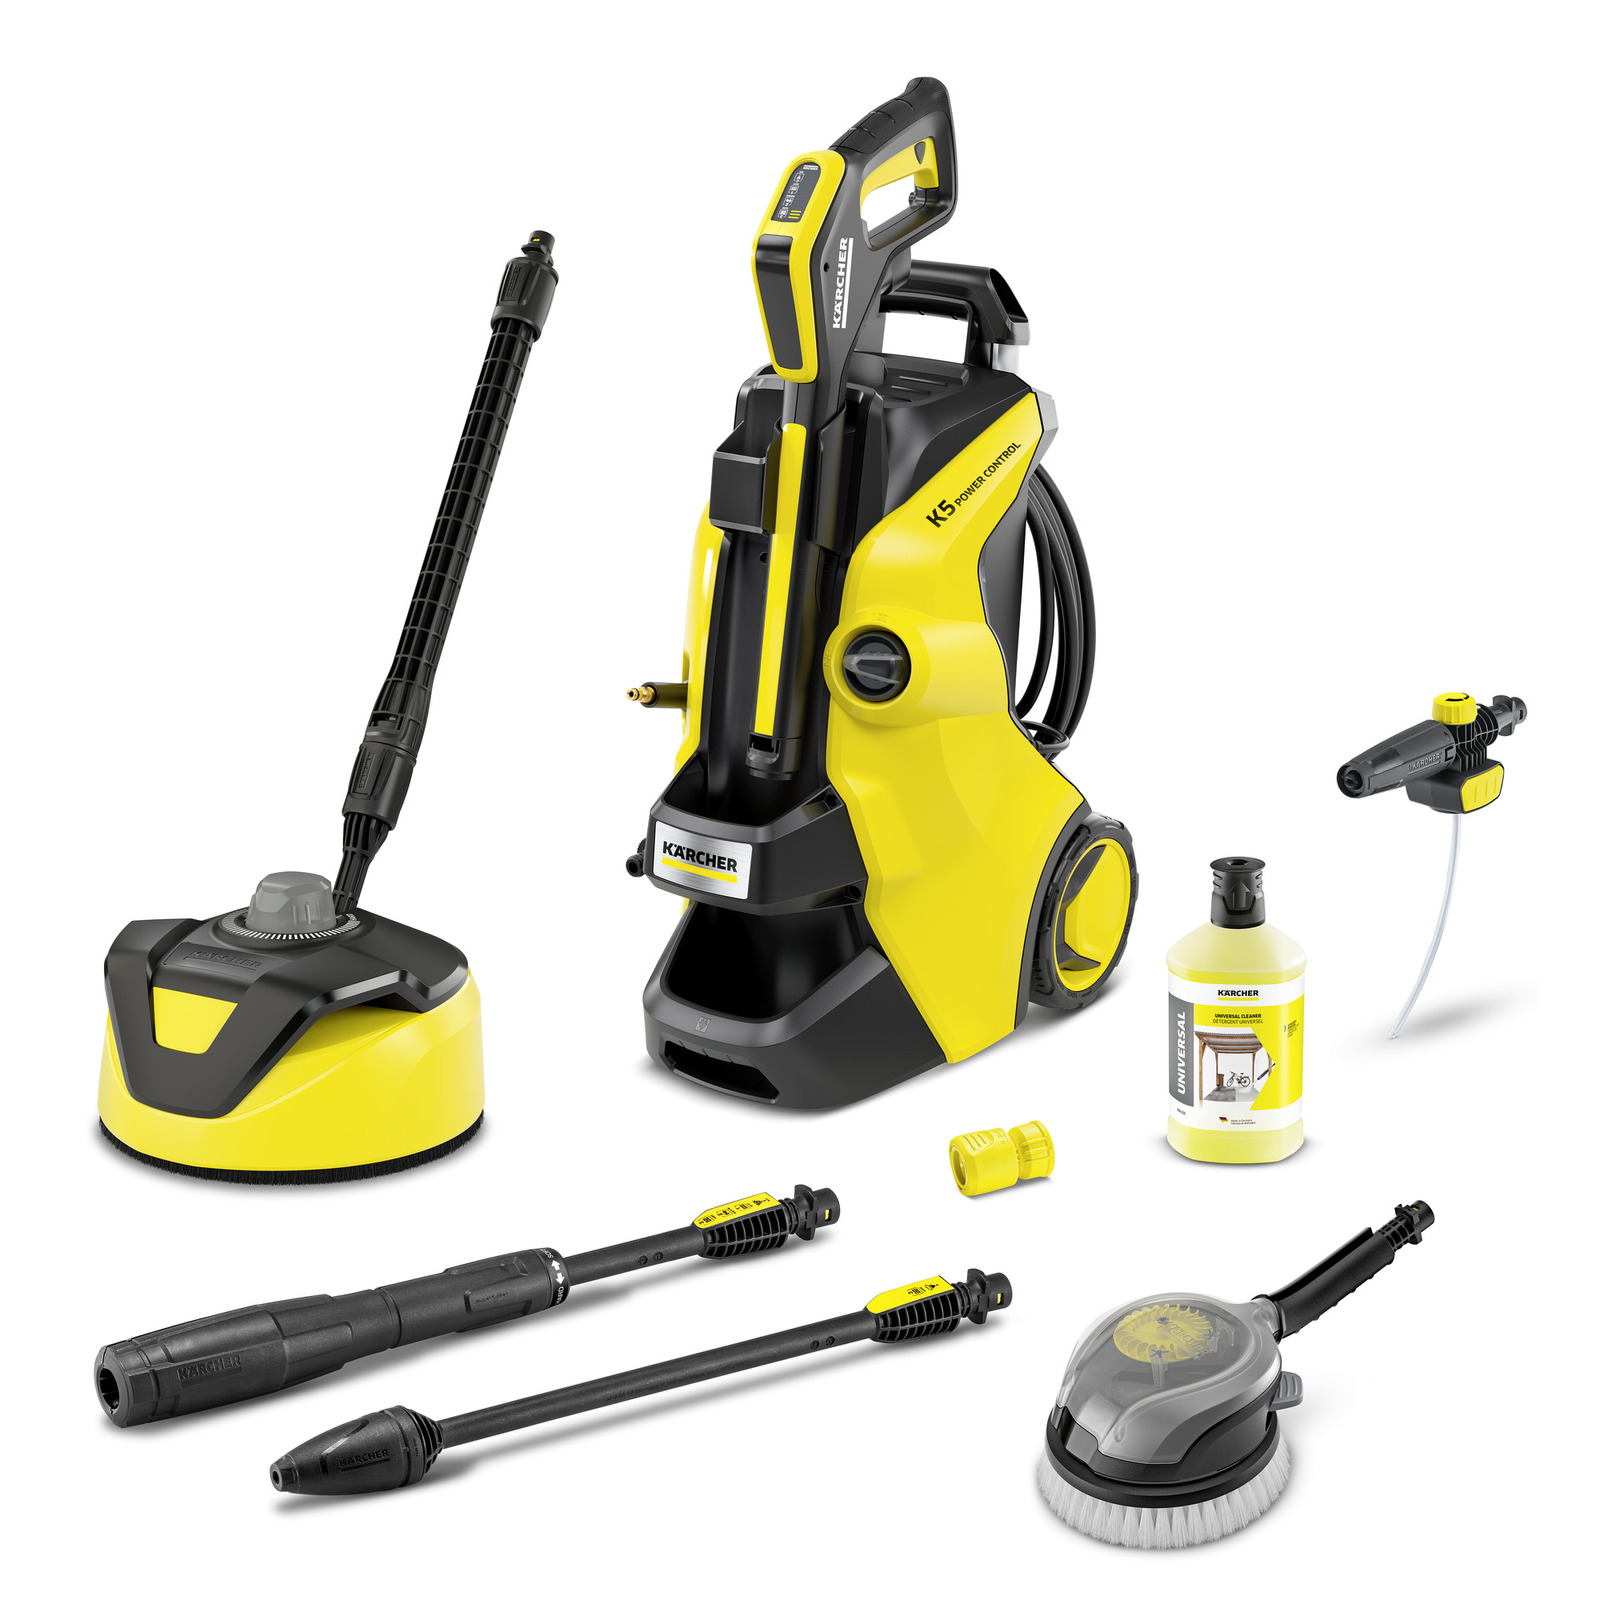 Vehicle Cleaning Kit, Pressure Washers